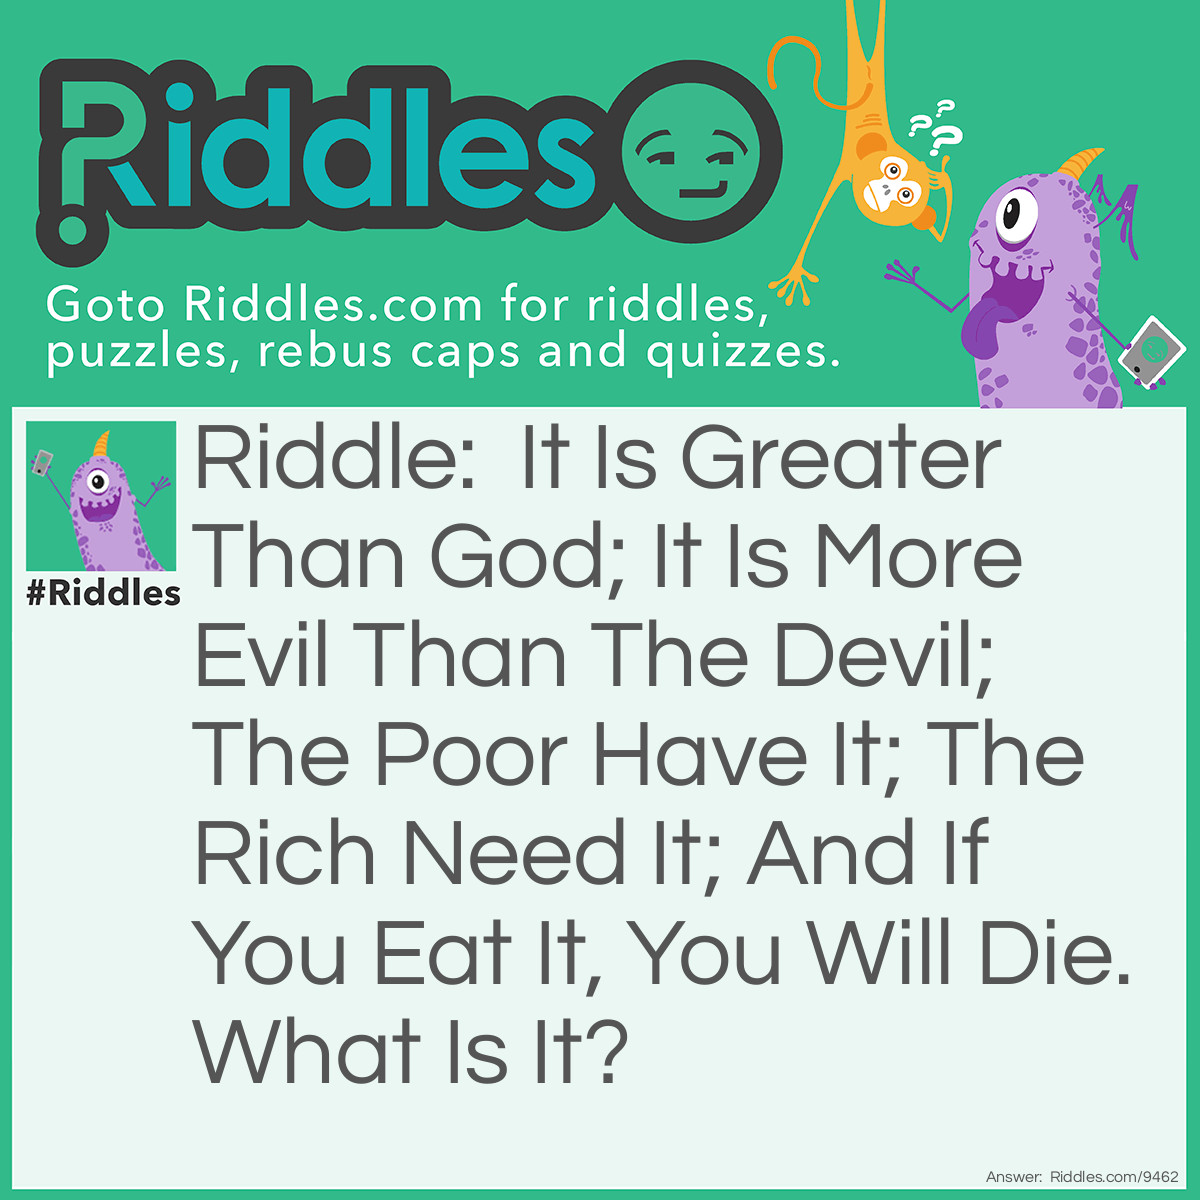 Riddle: It Is Greater Than God; It Is More Evil Than The Devil; The Poor Have It; The Rich Need It; And If You Eat It, You Will Die. What Is It? Answer: Nothing